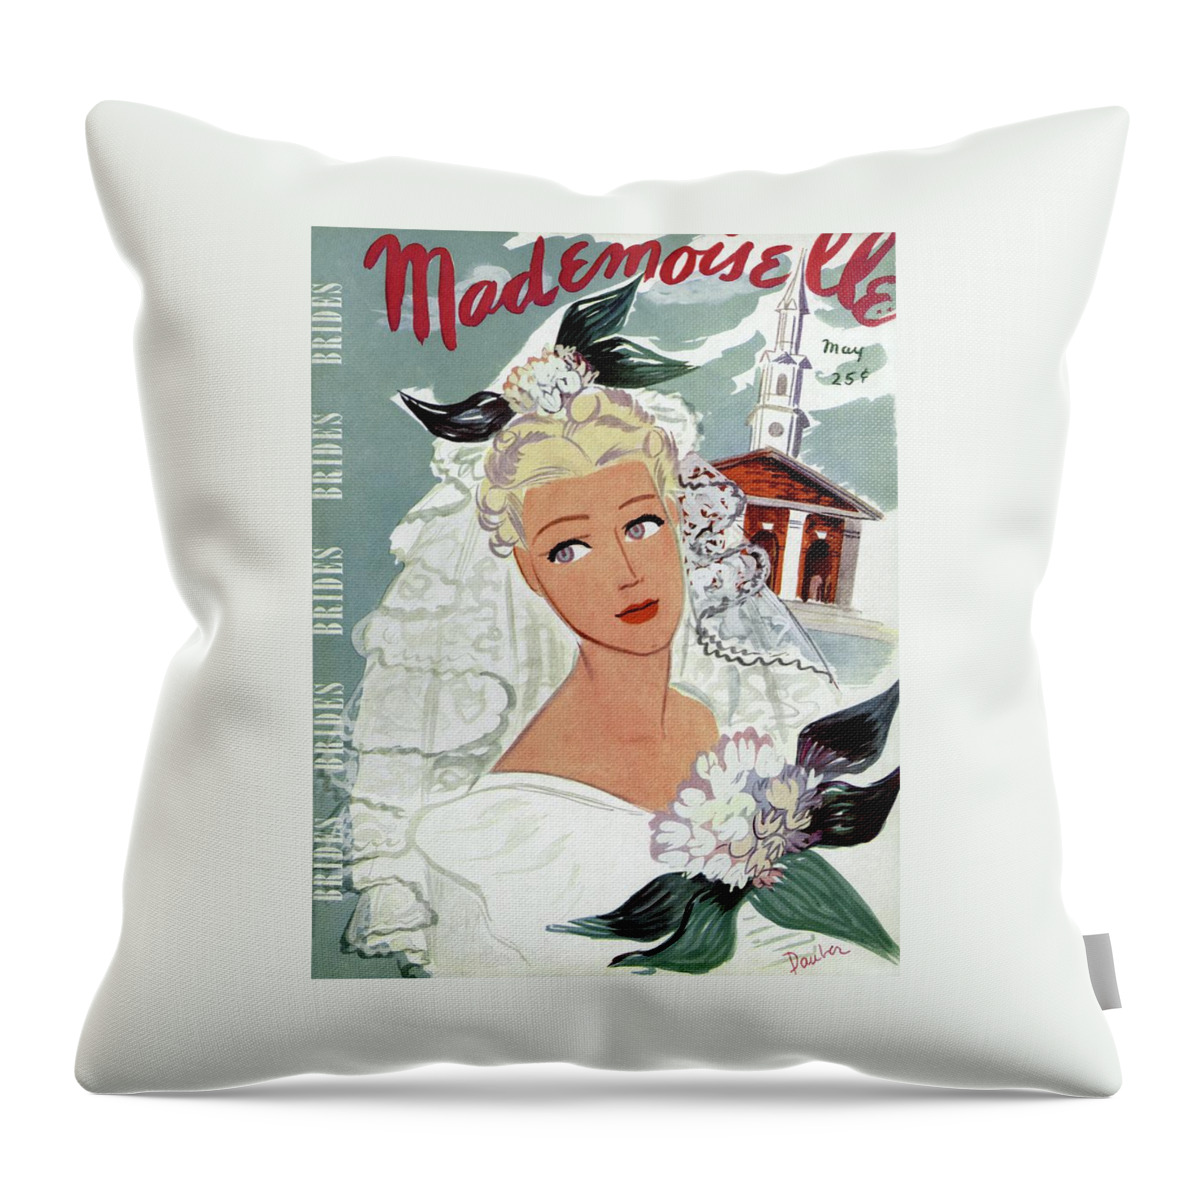 Mademoiselle Cover Featuring An Illustration Throw Pillow